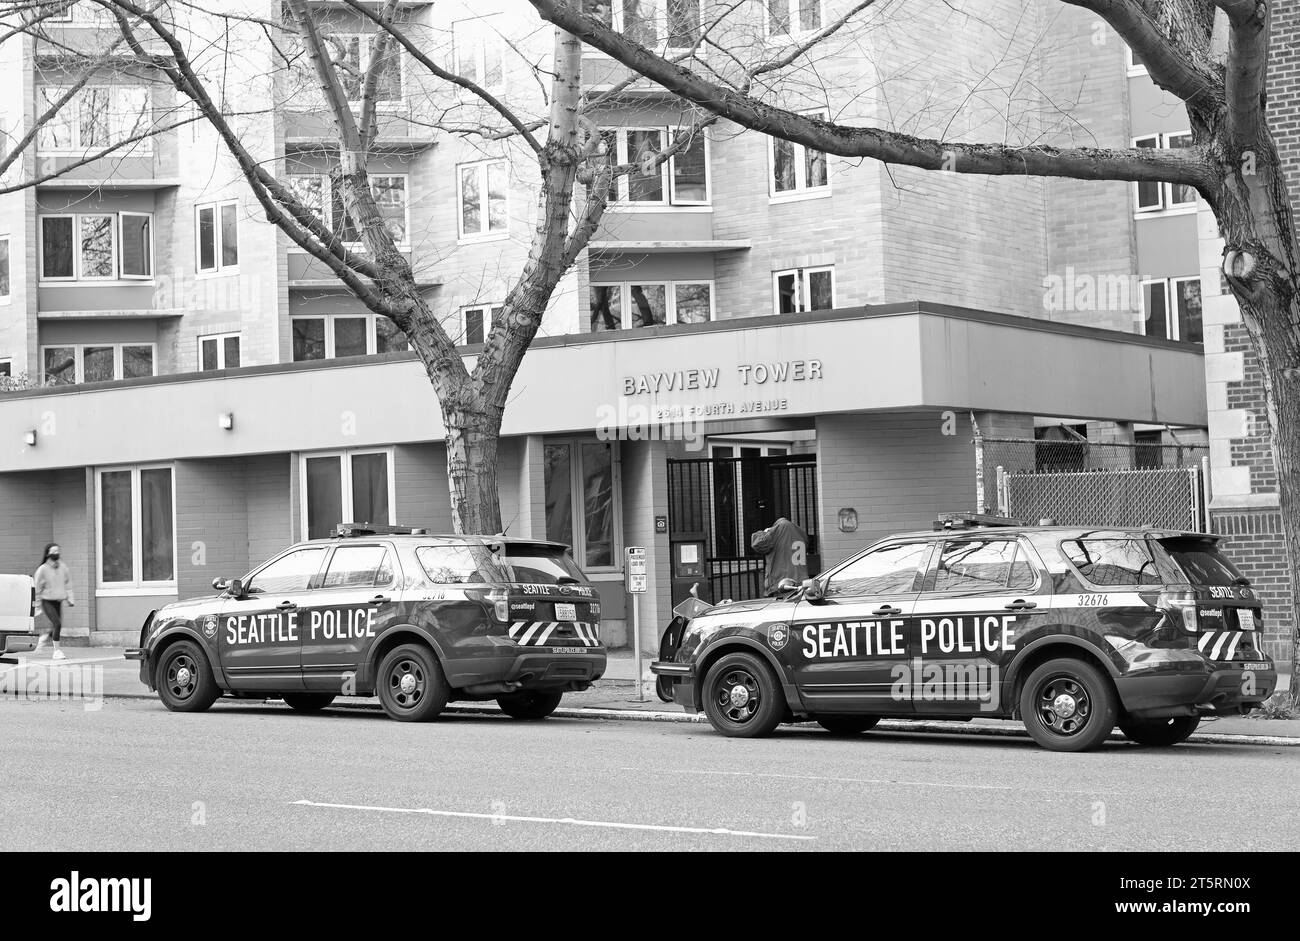 Seattle, Washington D.C. USA - April 03, 2021: seattle police cars parked at bayview tower building. Stock Photo